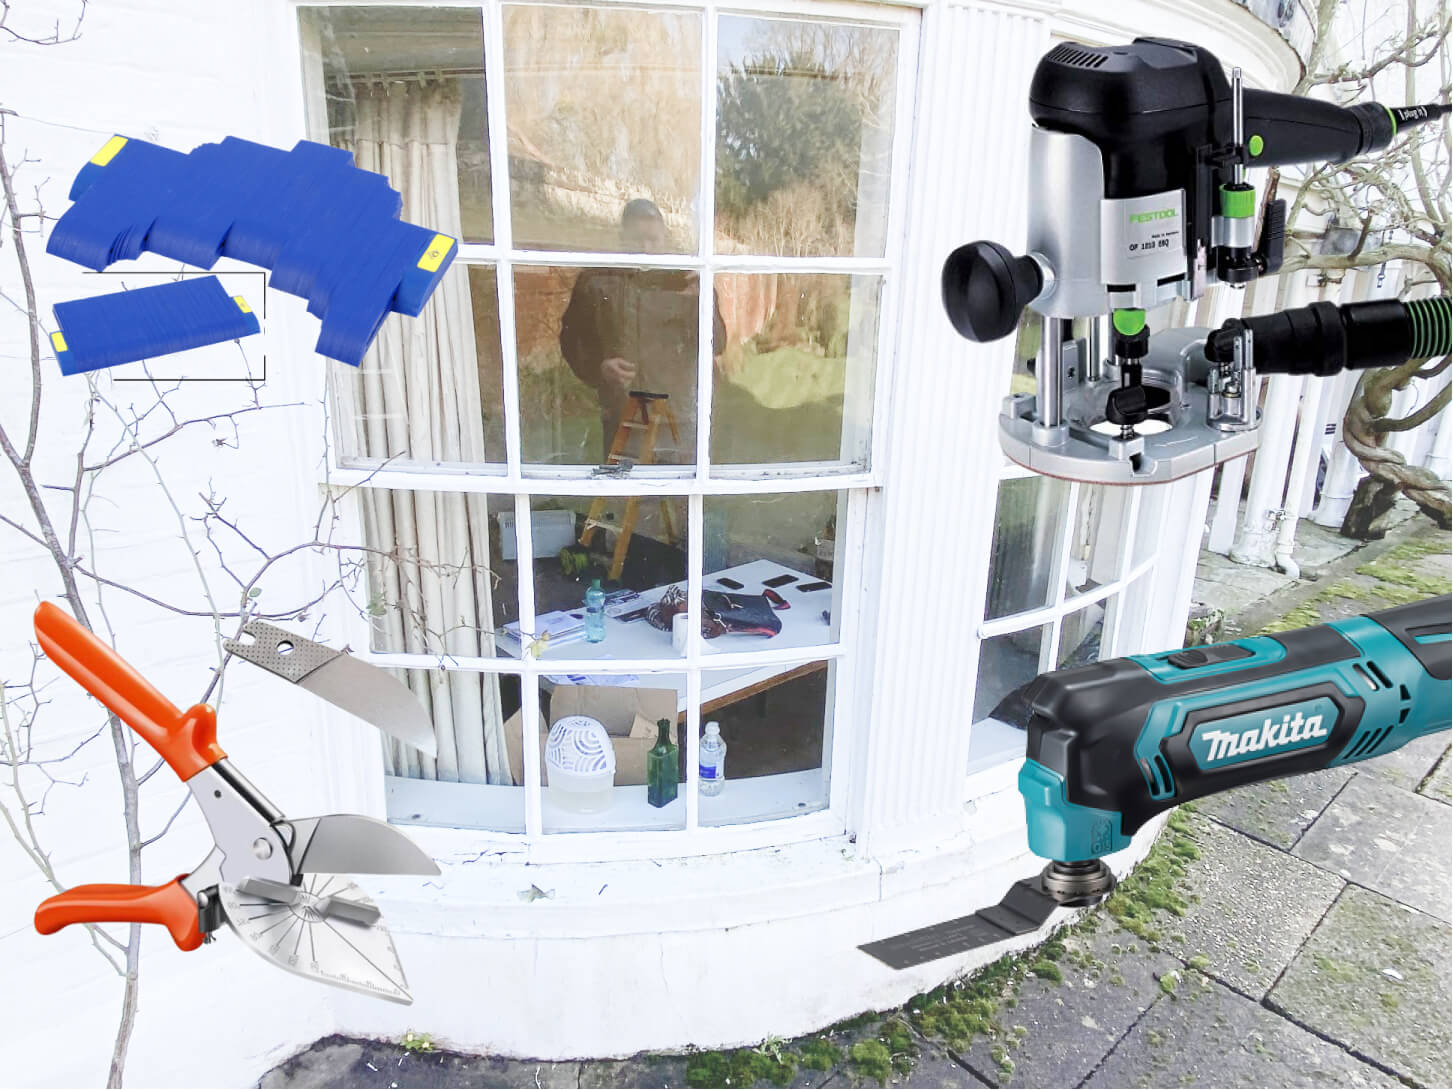 Tools & equipment used in timber windows restoration projects